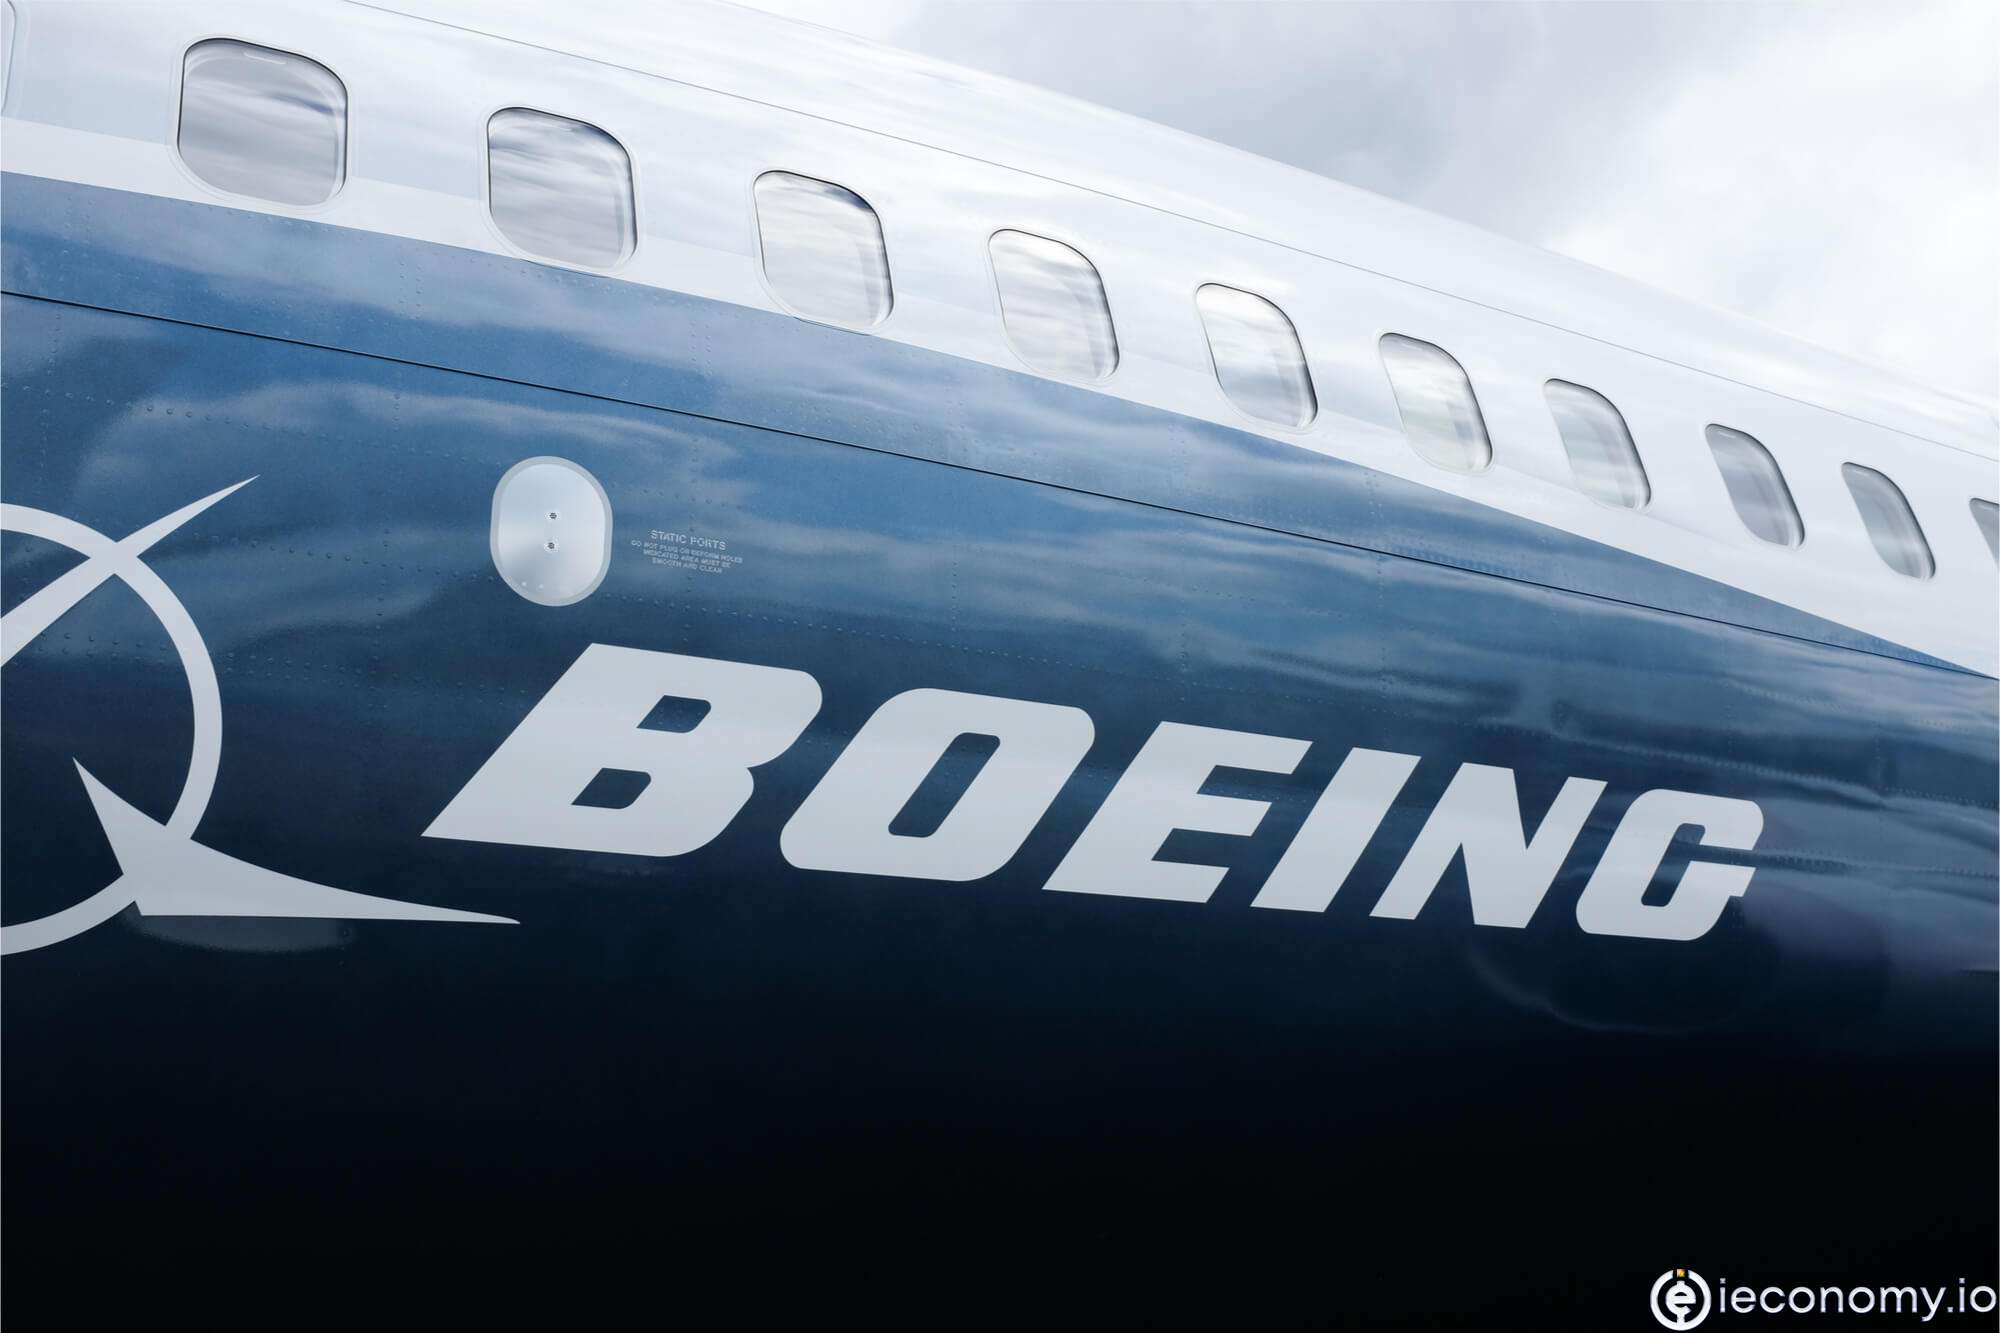 Boeing has returned to the game after six losing quarters in a row